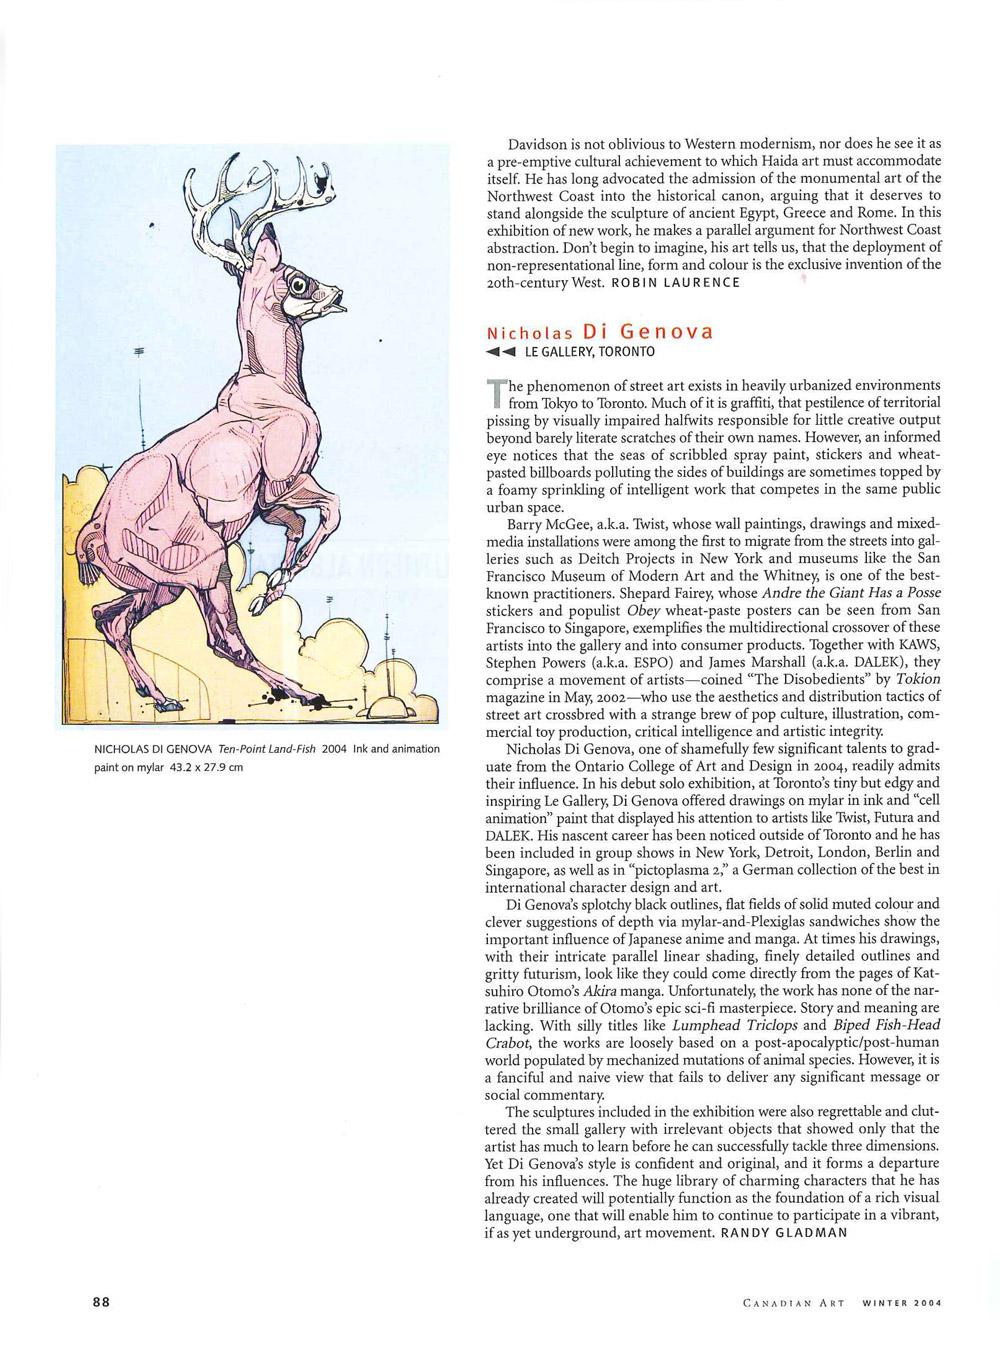 A page from the Winter 2004 issue of <em>Canadian Art</em>